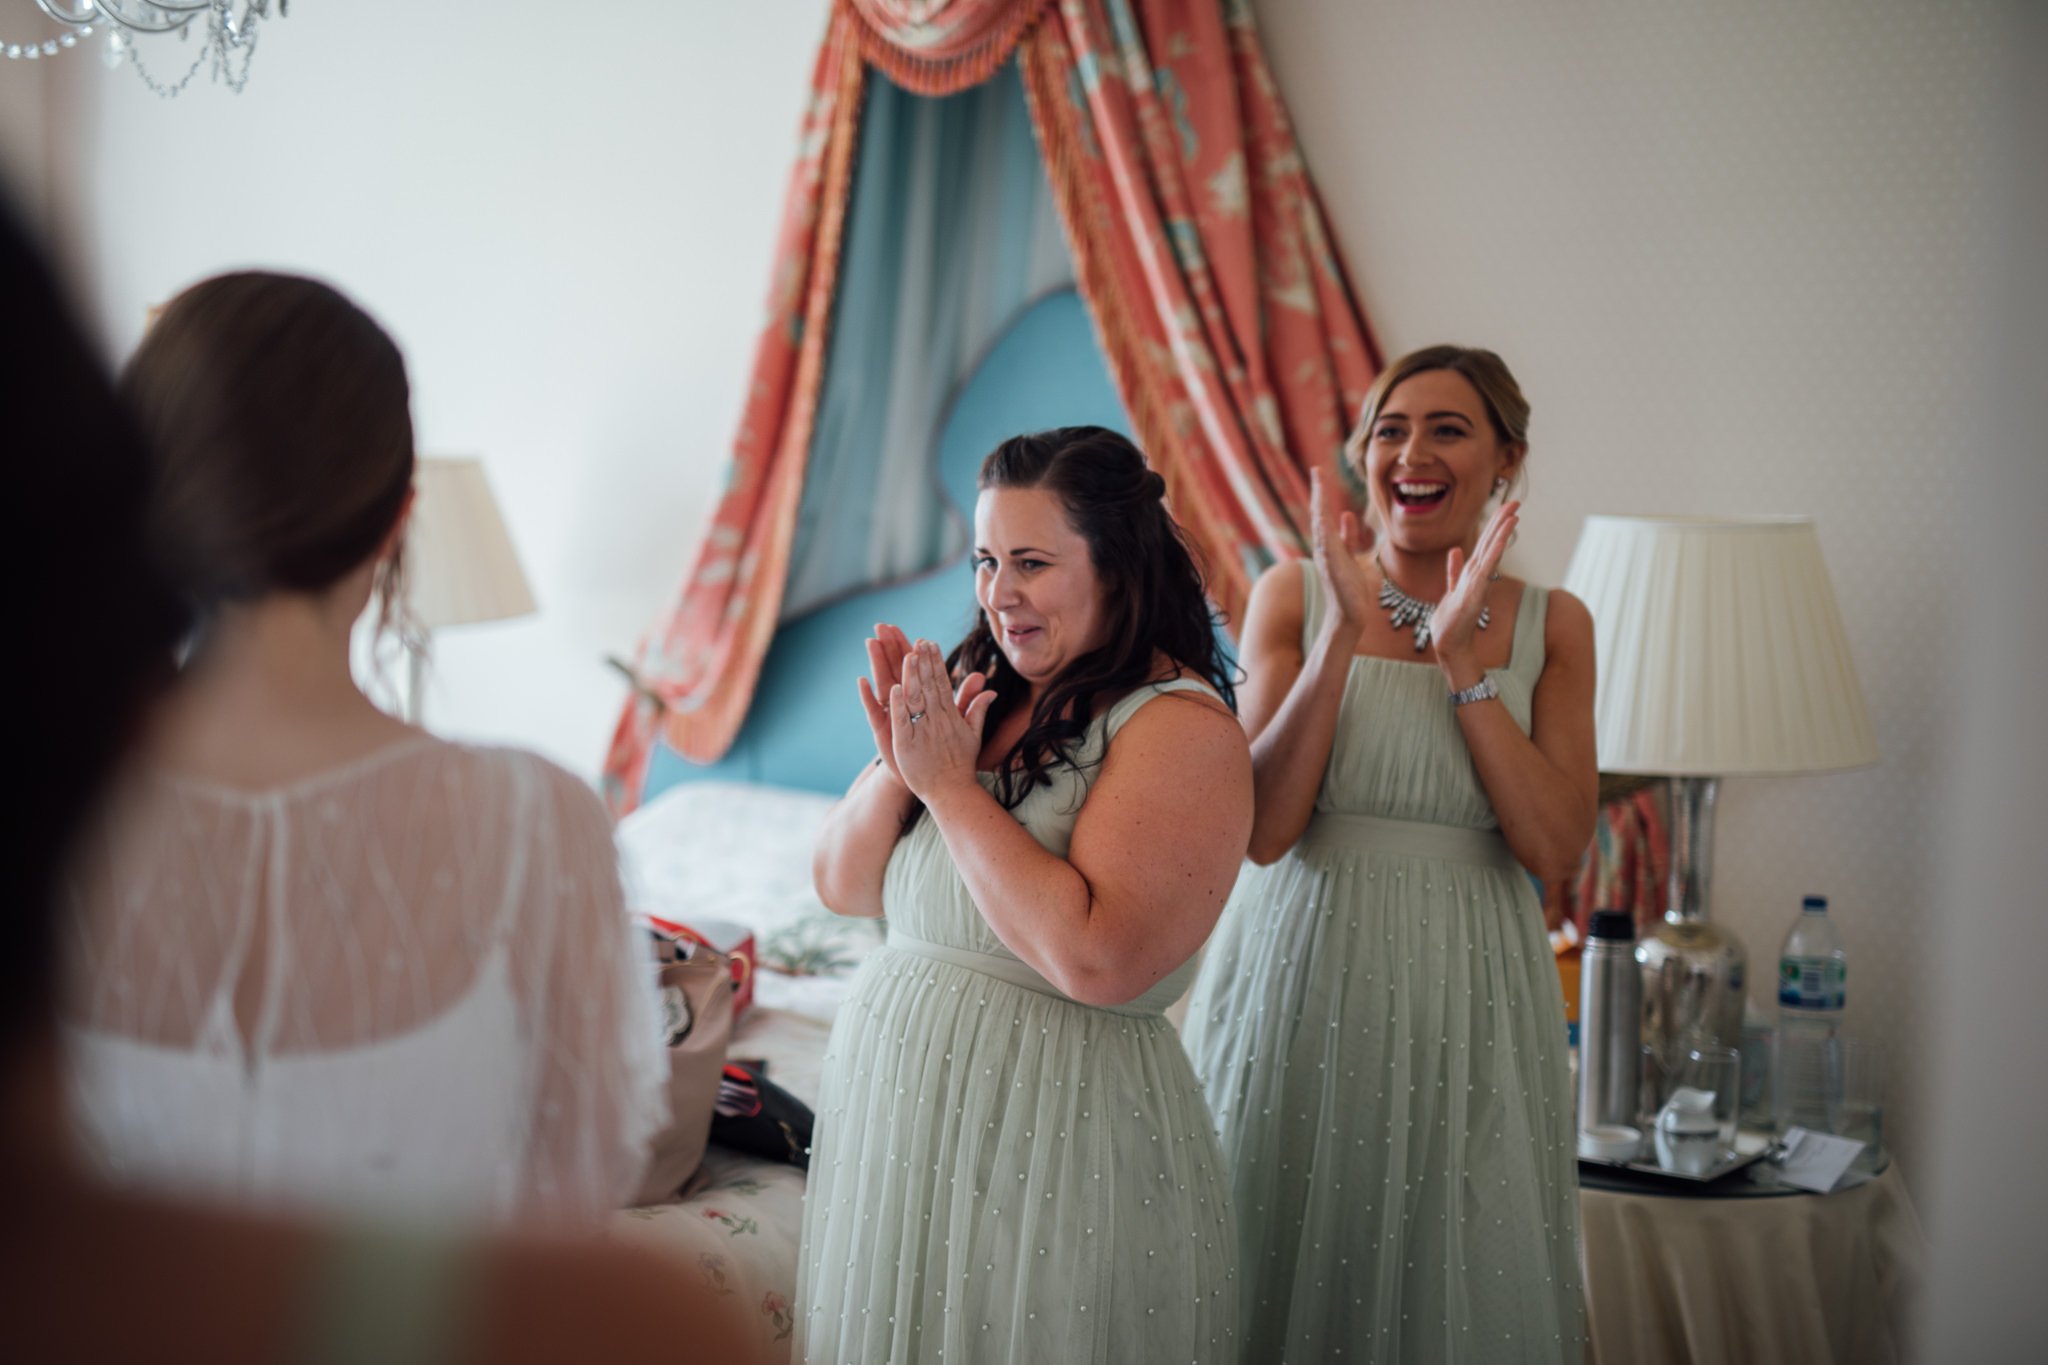  Bridesmaid are overjoyed at seeing the bride in her wedding dress for the first time 